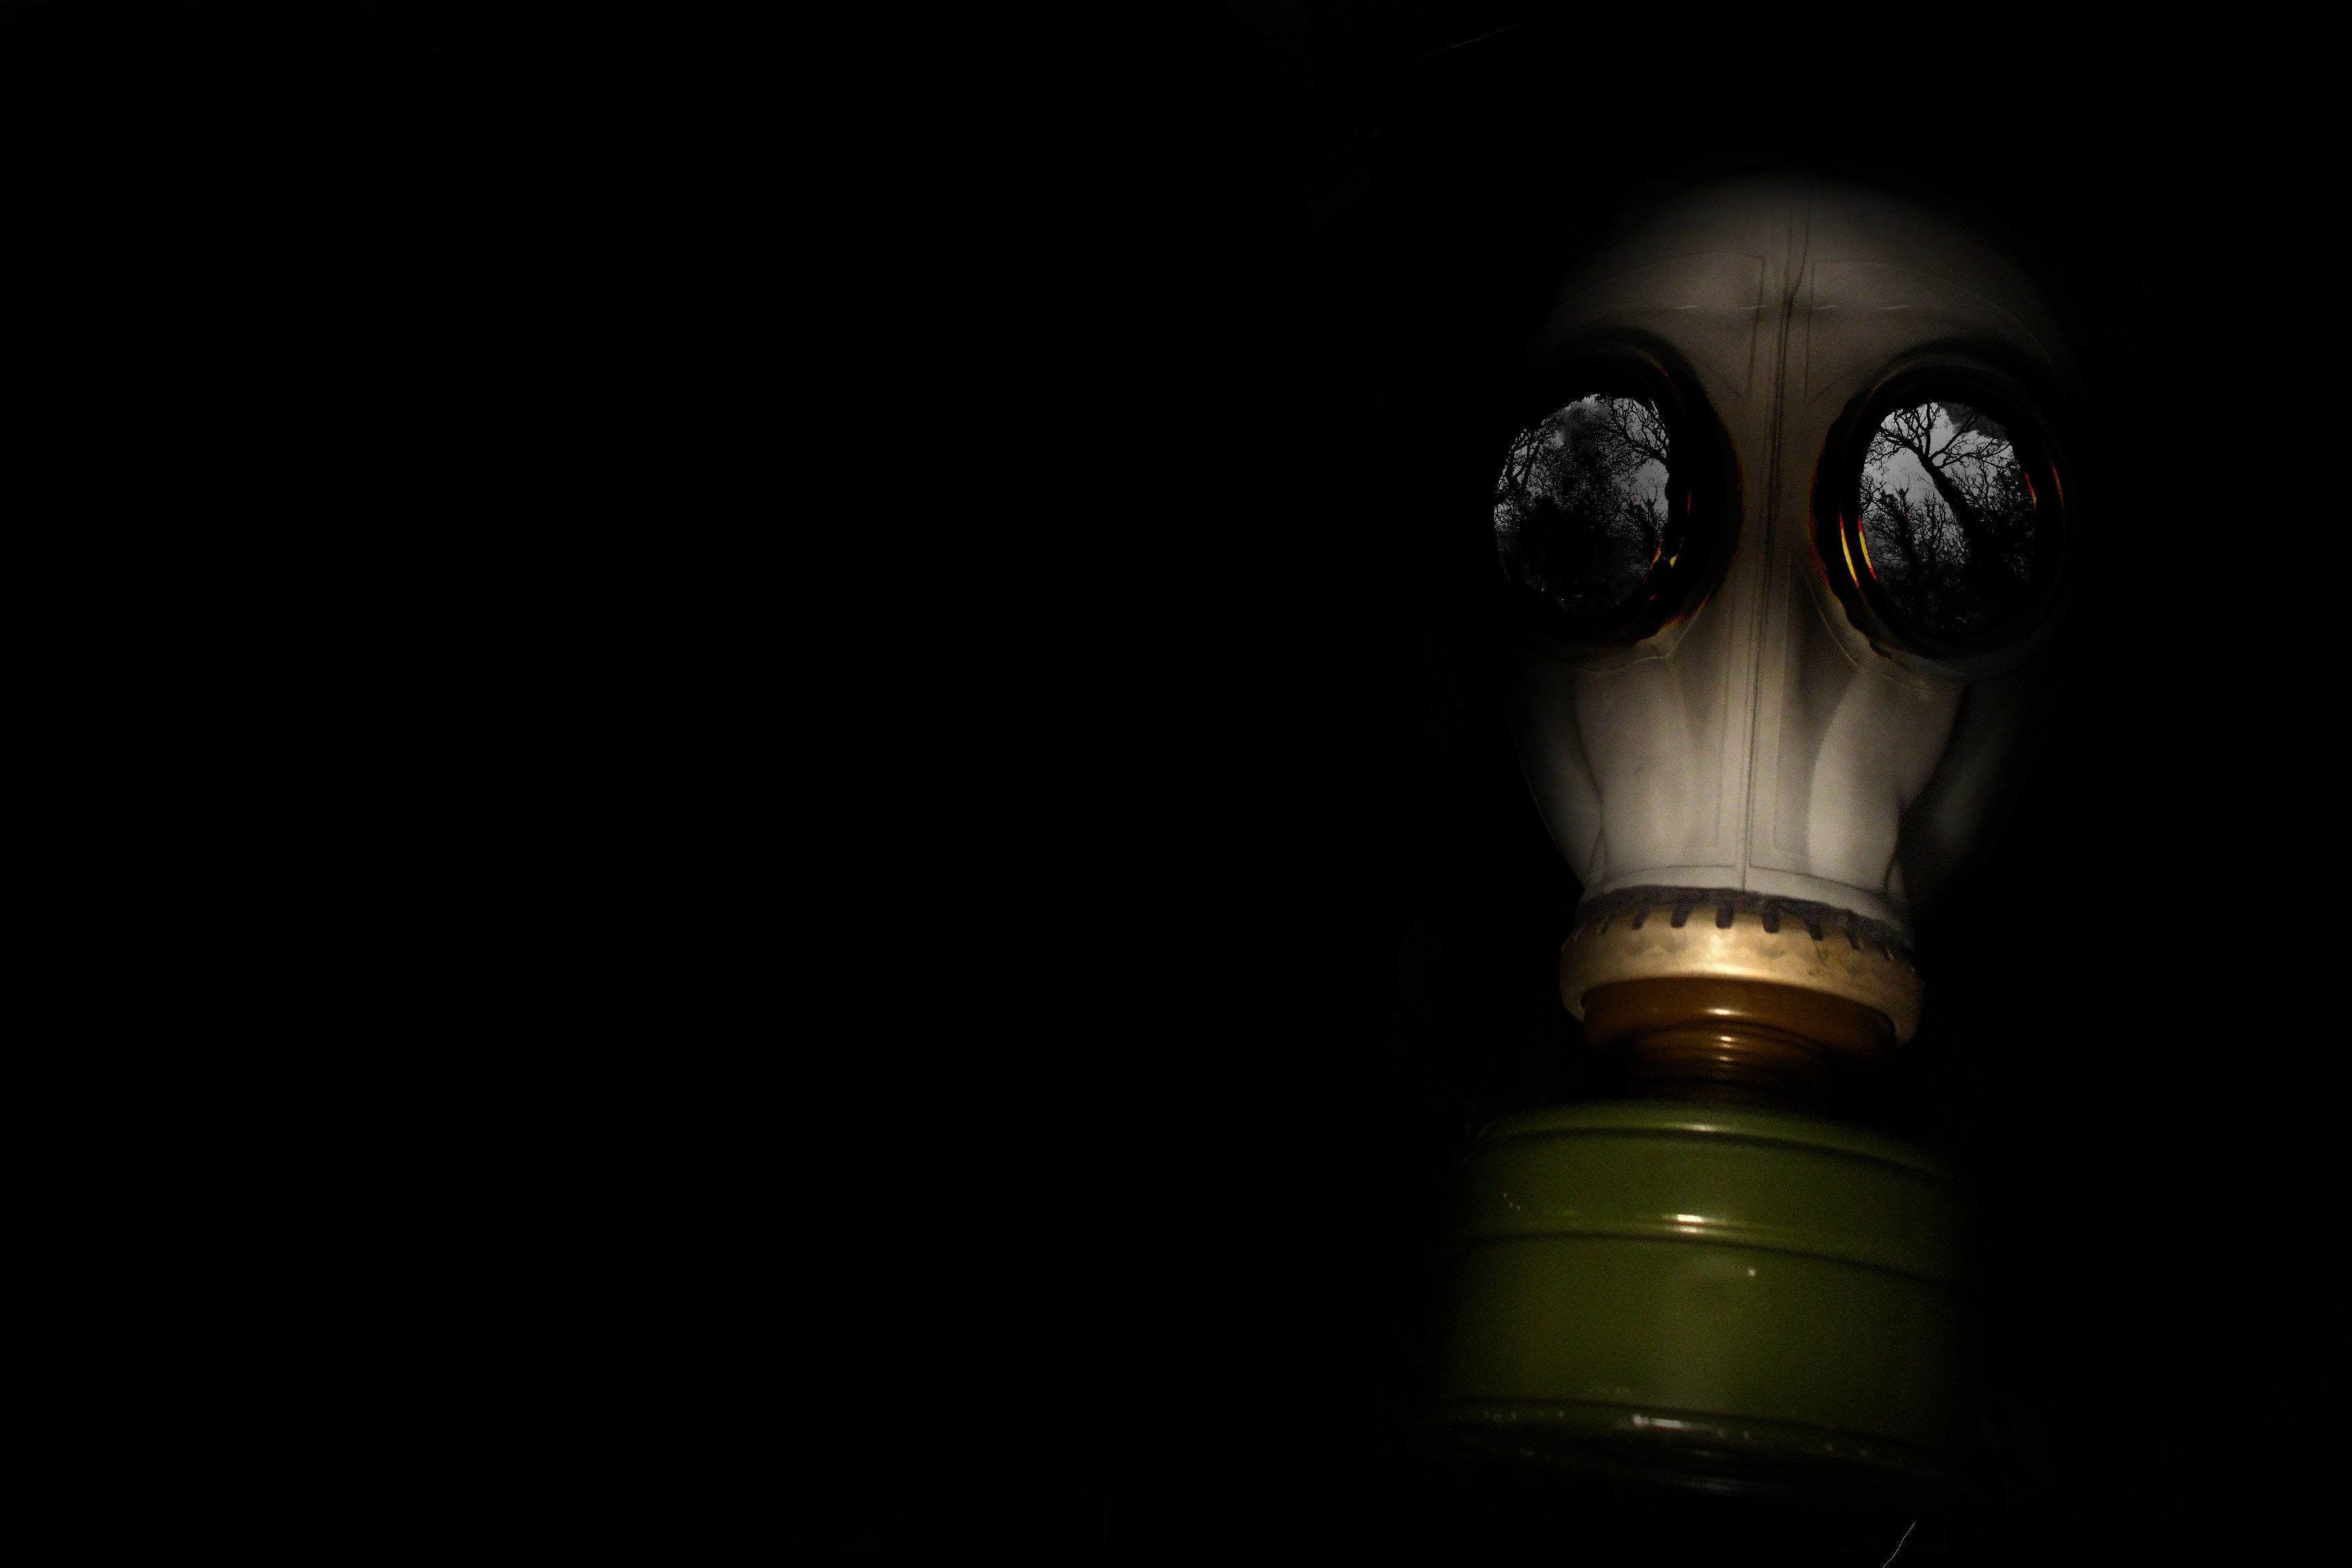 Gas Mask Wallpaper by HarkedEviction on DeviantArt